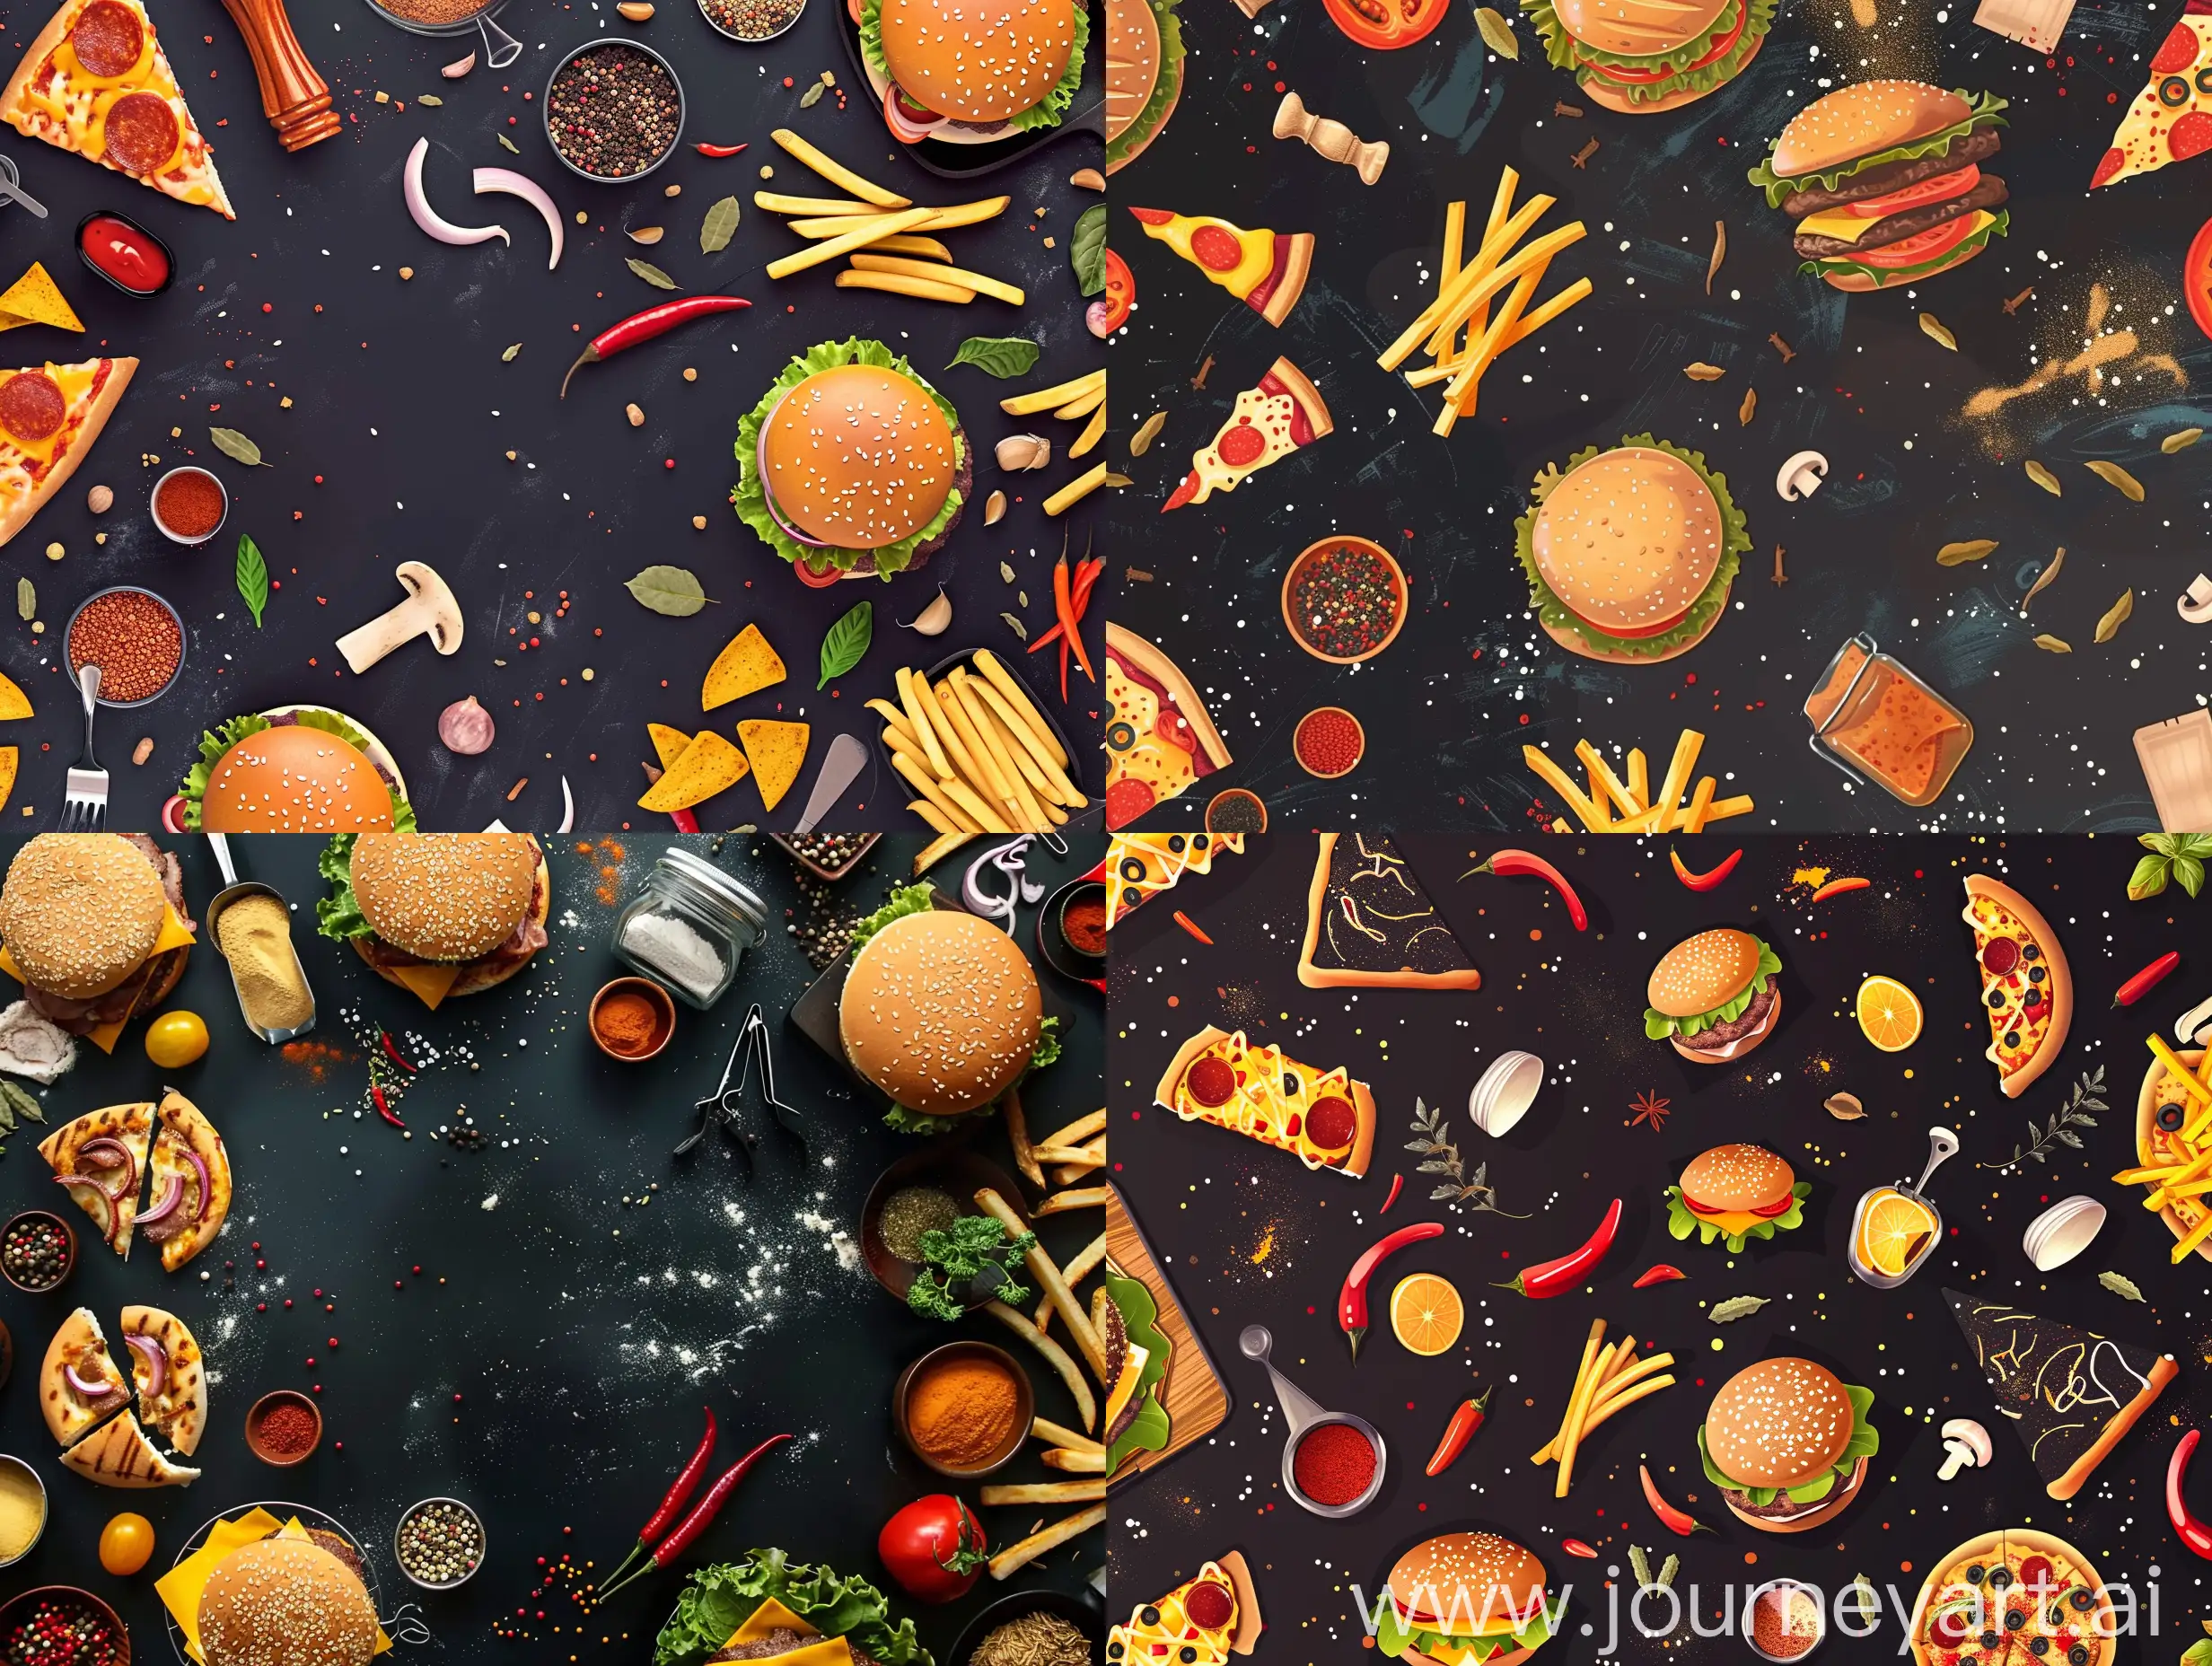 Delicious-Fast-Food-Spread-with-Burgers-Pizza-and-French-Fries-on-Dark-Background